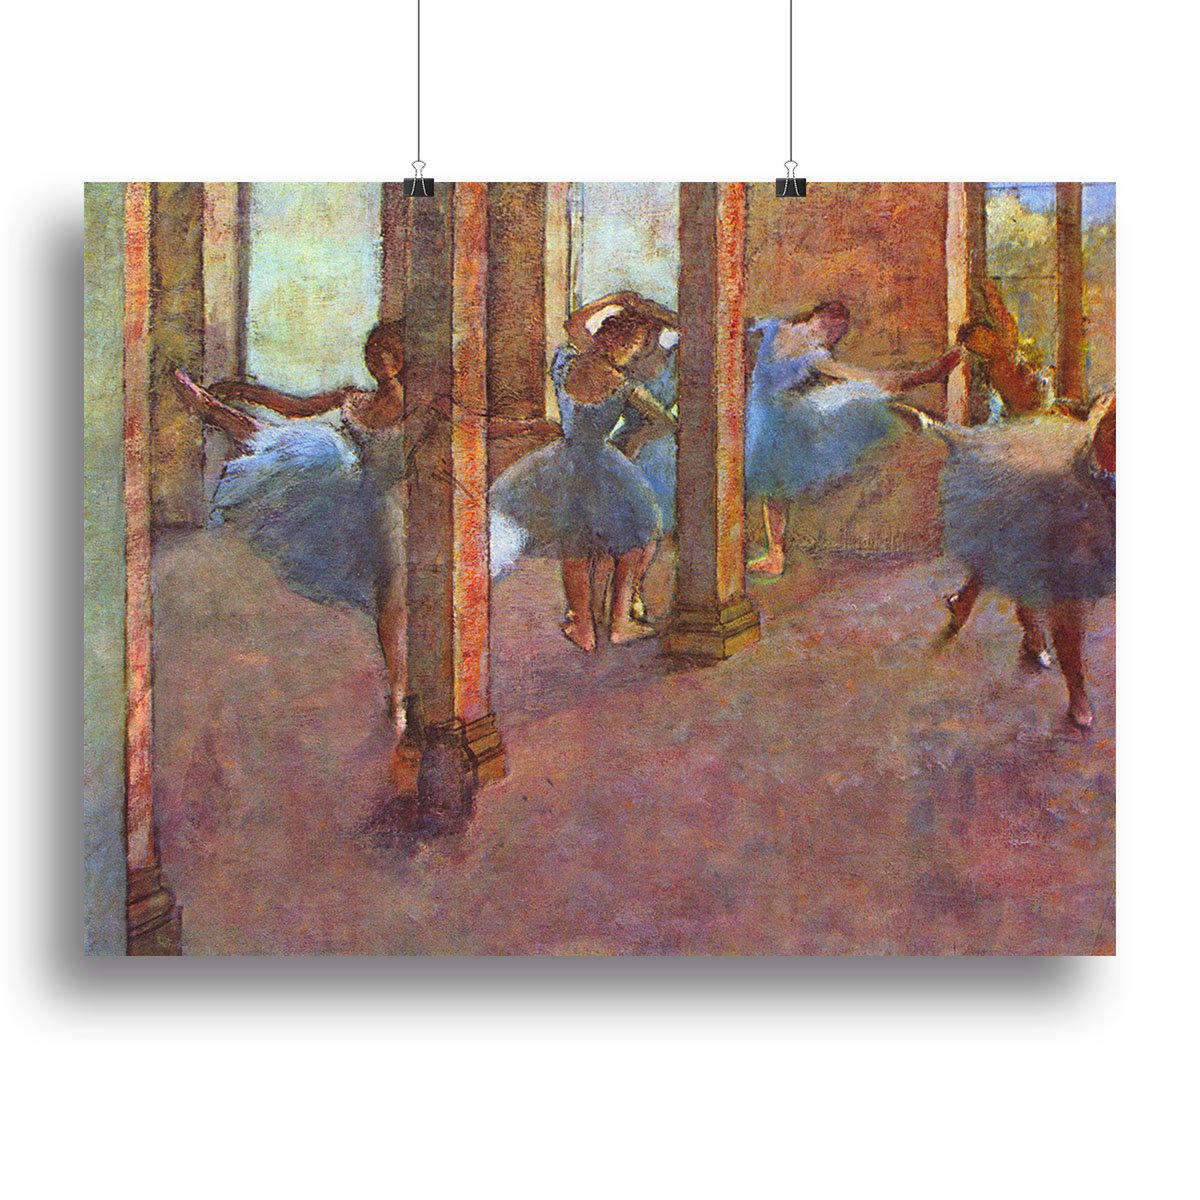 Dancers in the Foyer by Degas Canvas Print or Poster